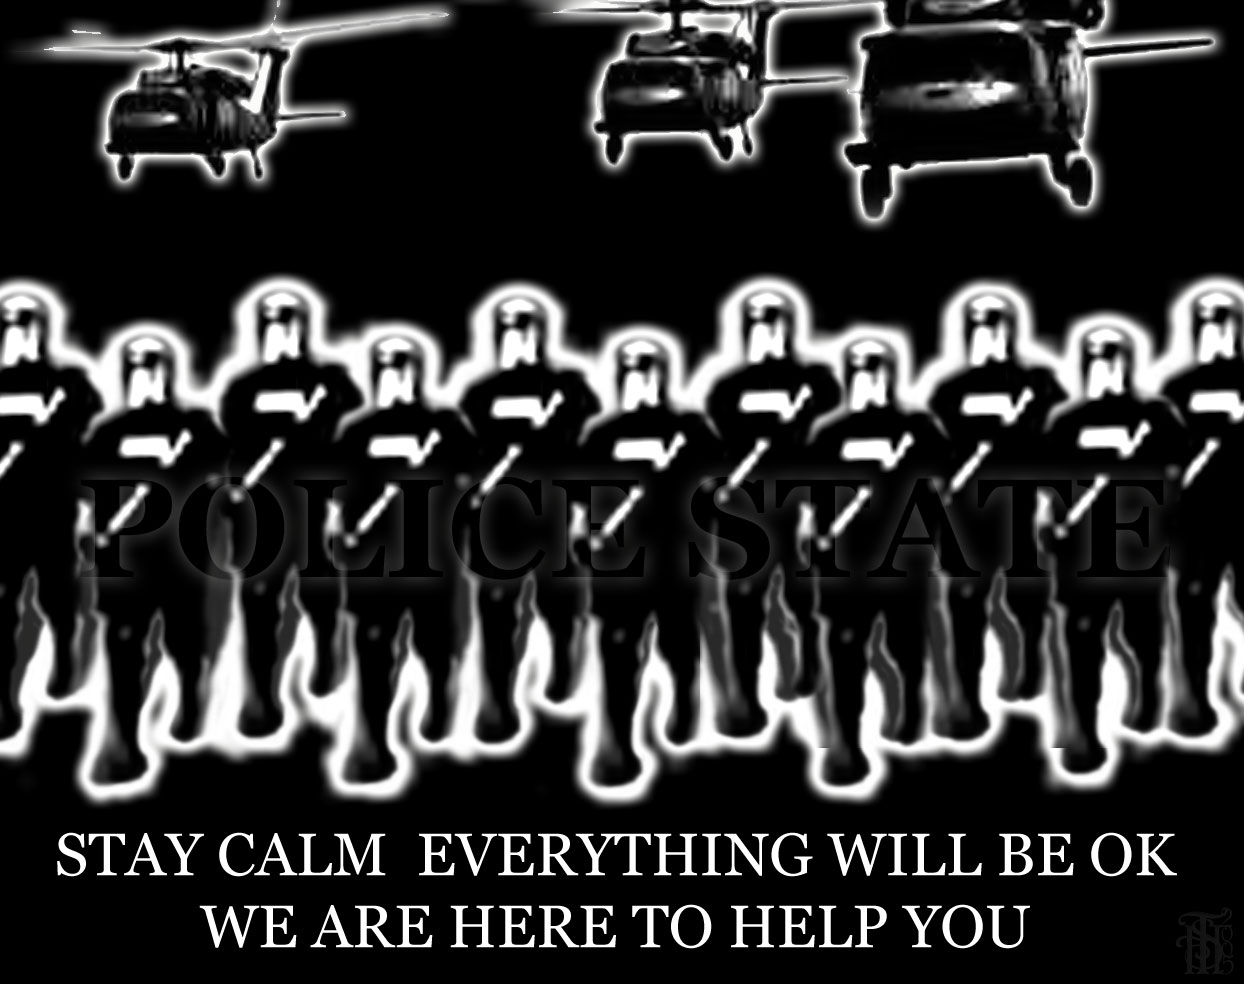 Implementation of police state delayed… again… now scheduled for summer